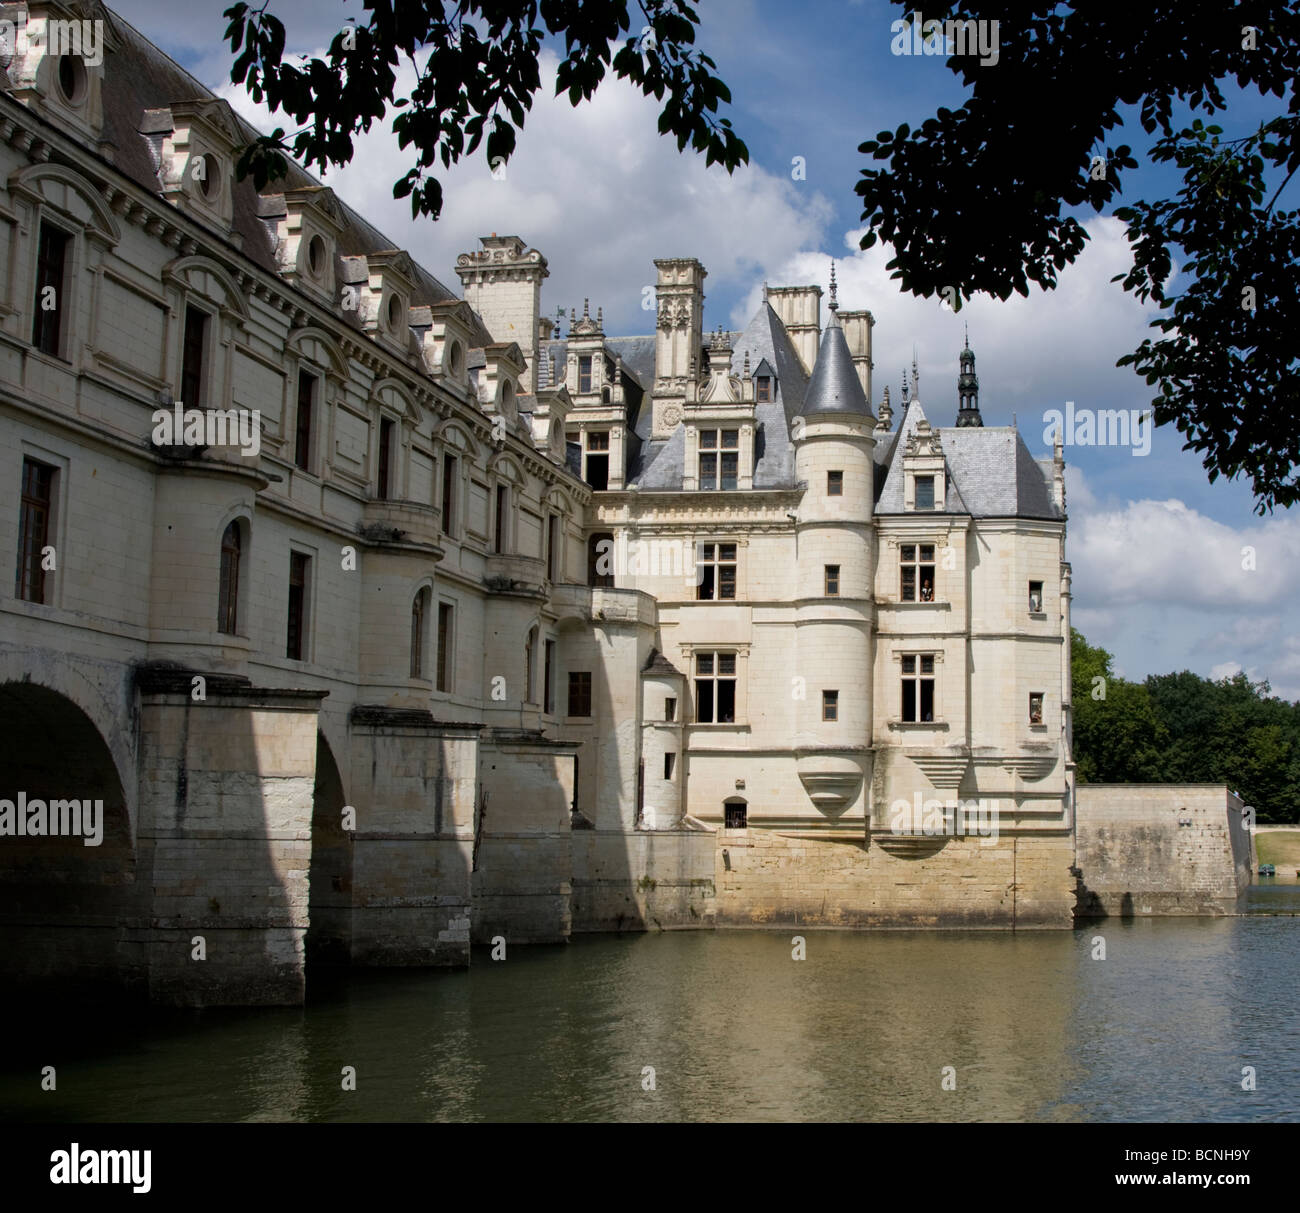 Chateau Chenonceau, Loire Valley, France Stock Photo - Alamy